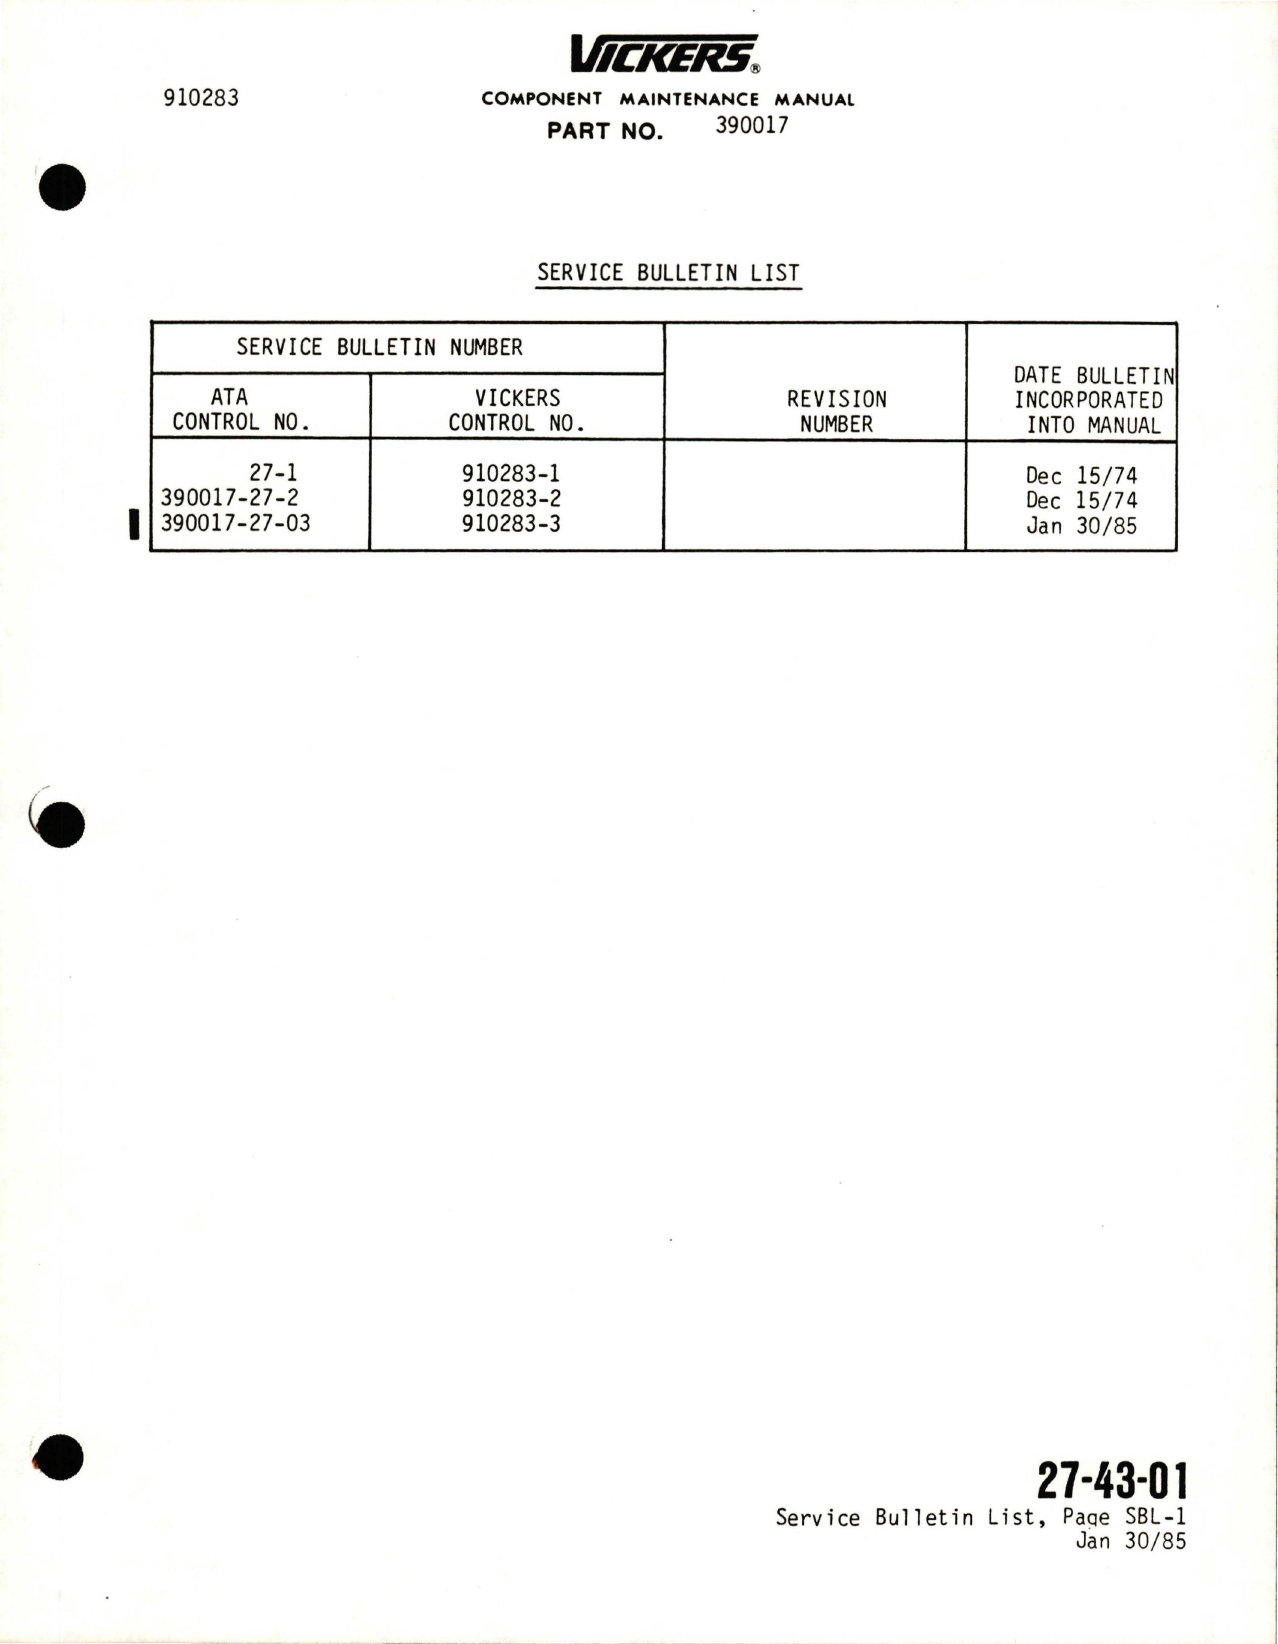 Sample page 5 from AirCorps Library document: Maintenance Manual with Illustrated Parts Breakdown for Hydraulic Motor Assembly - Model CMV3-075-1C and CMV3-075-1D